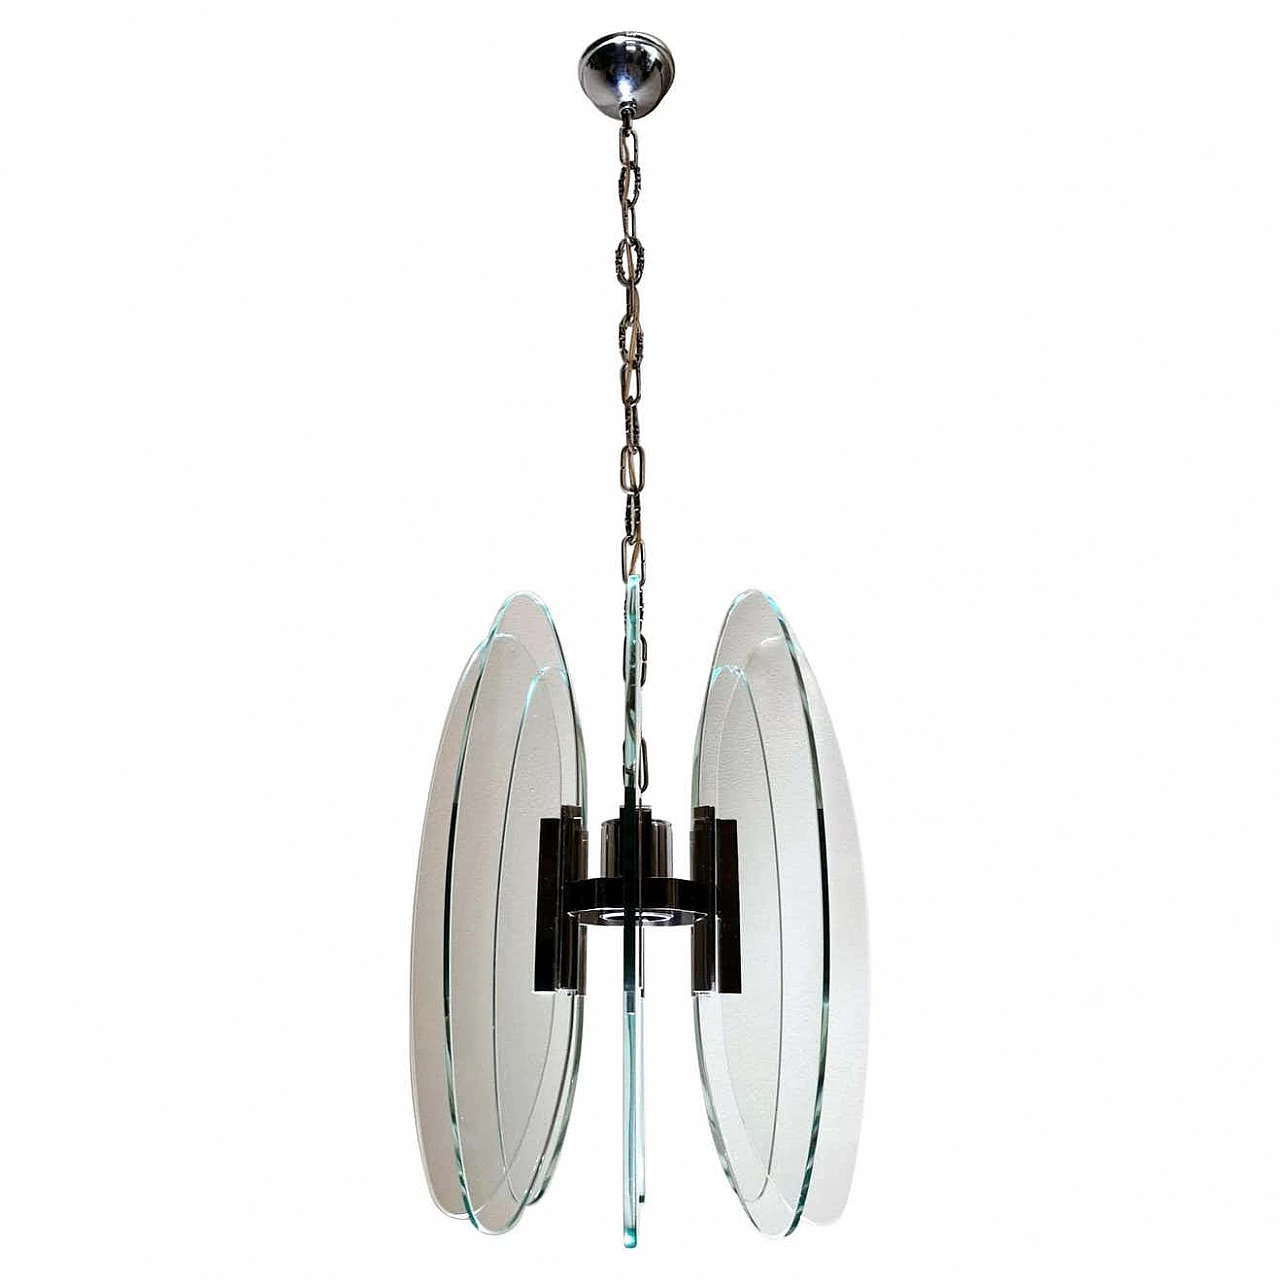 Fontana Arte style chandelier in tempered glass and nickel plated brass, 60s 1261563